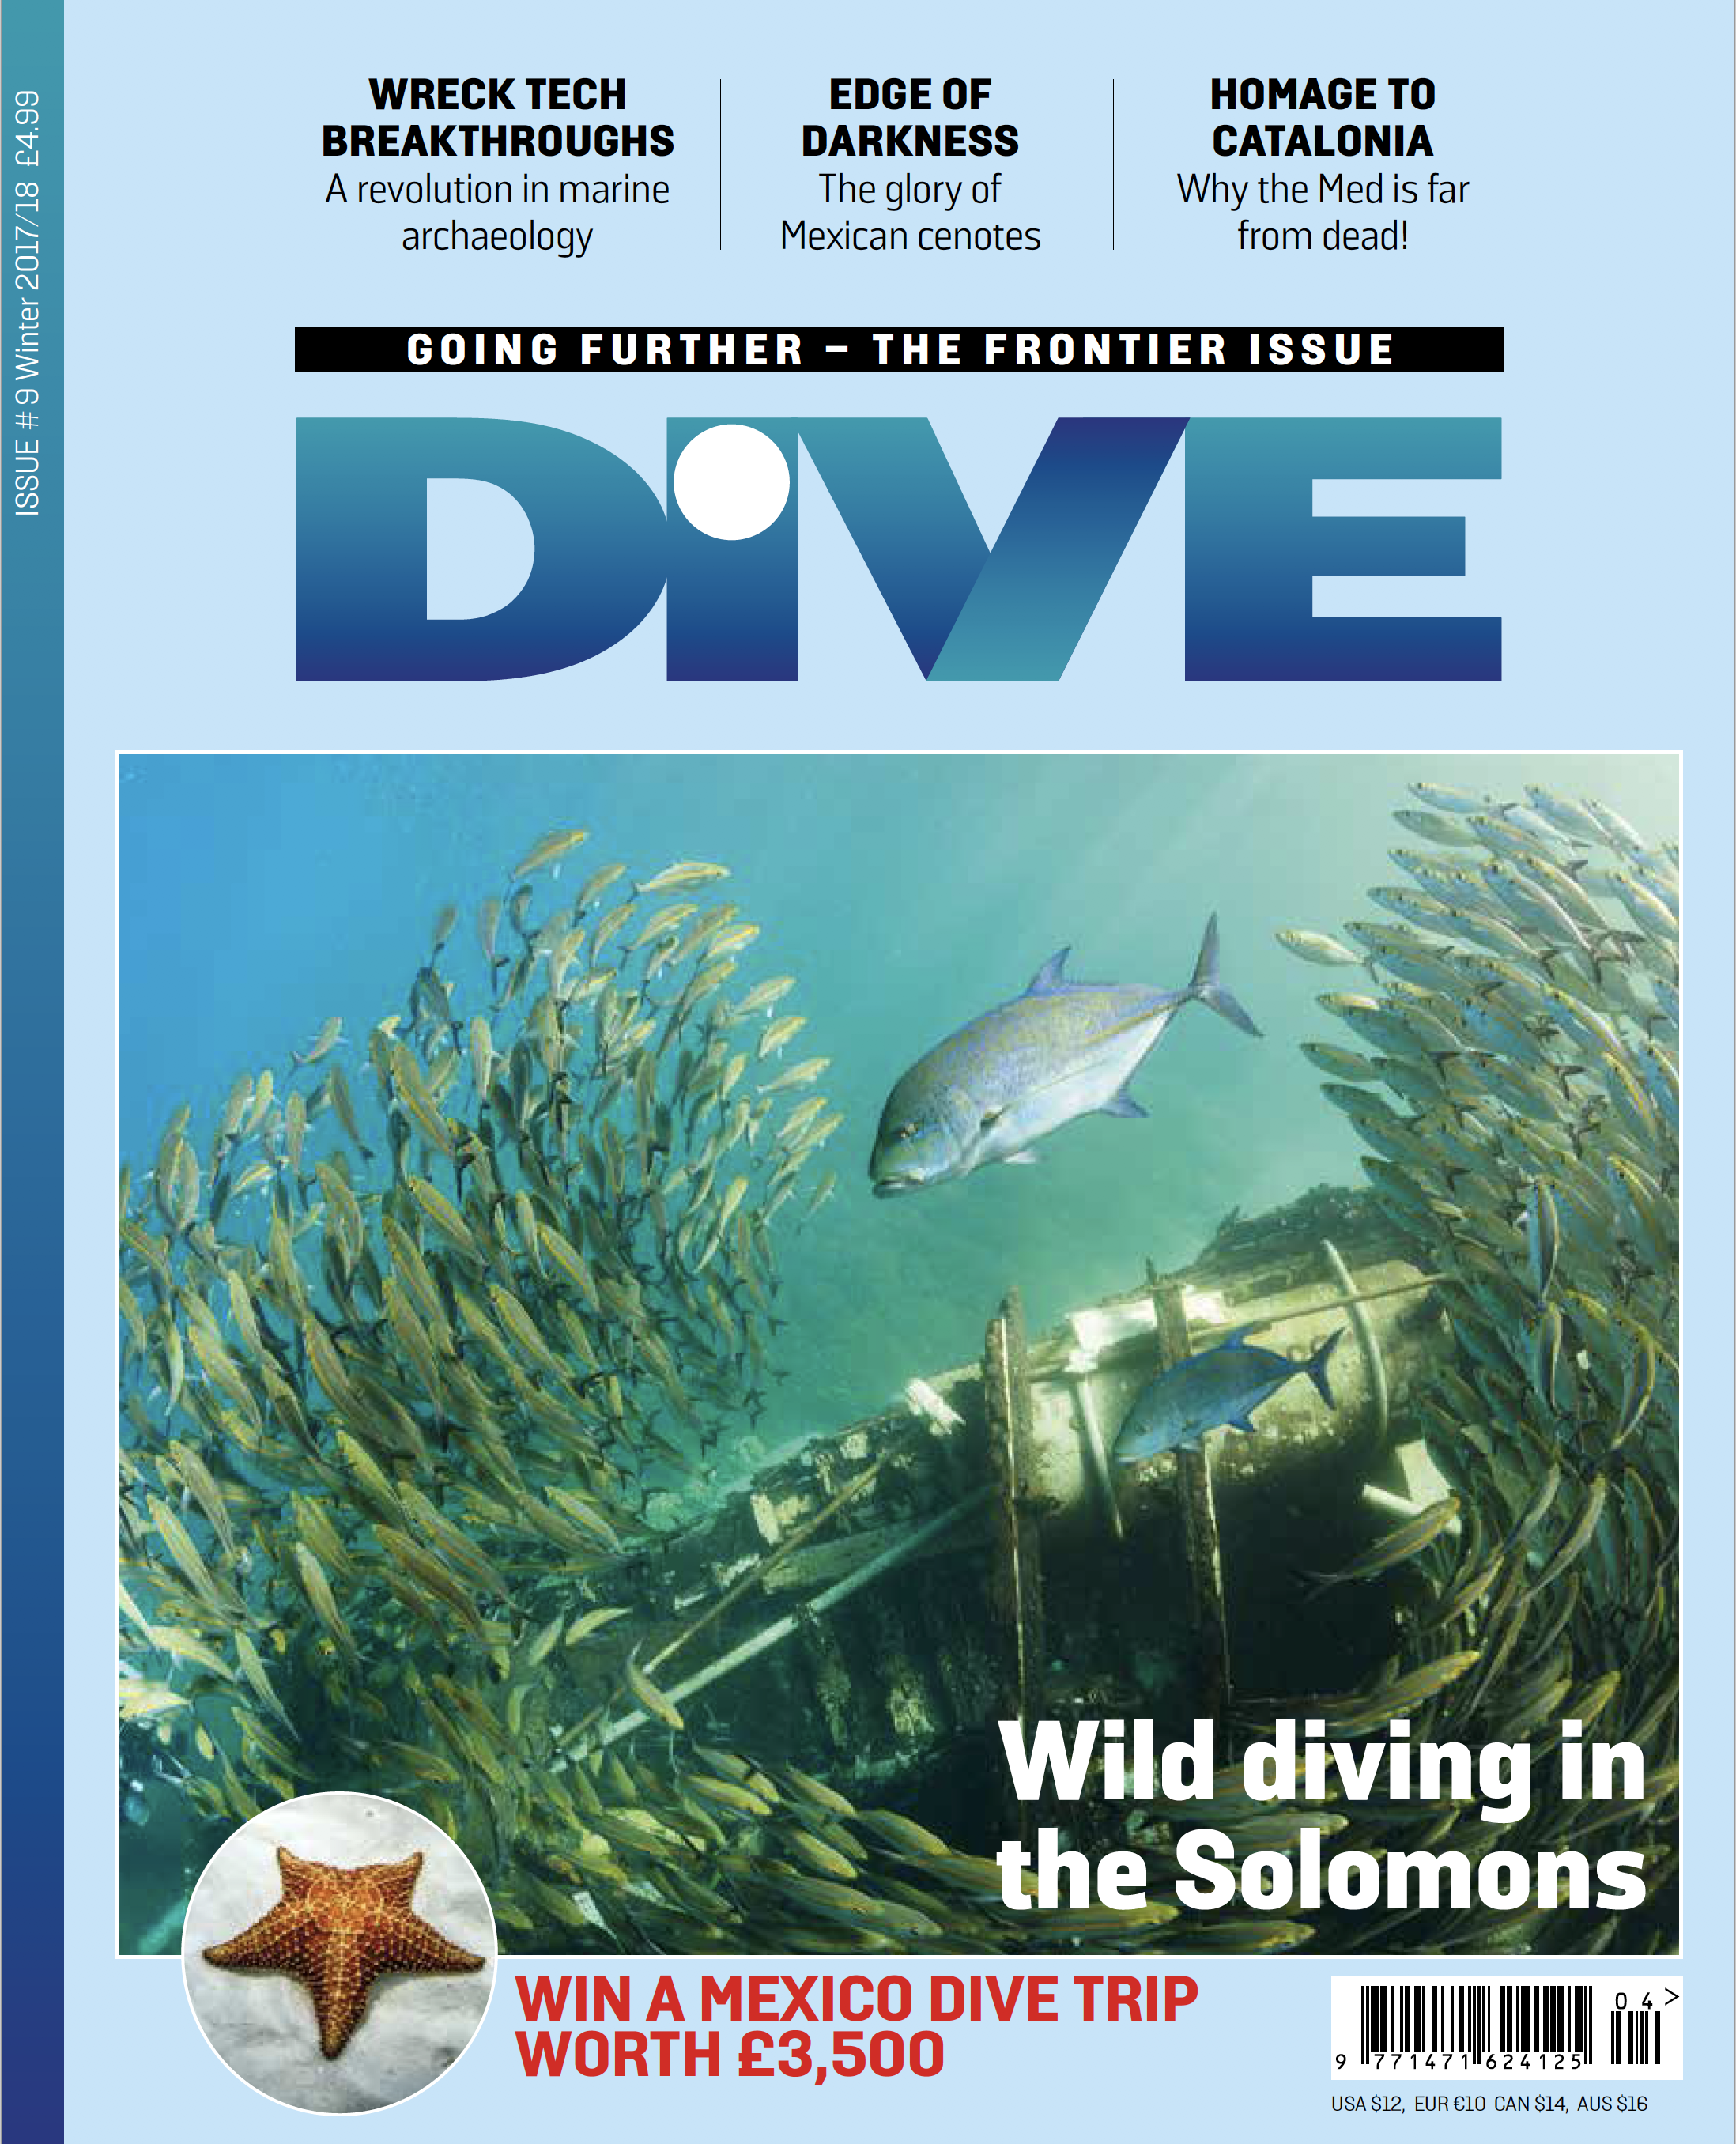 DIVE Cover Image 12-17.png